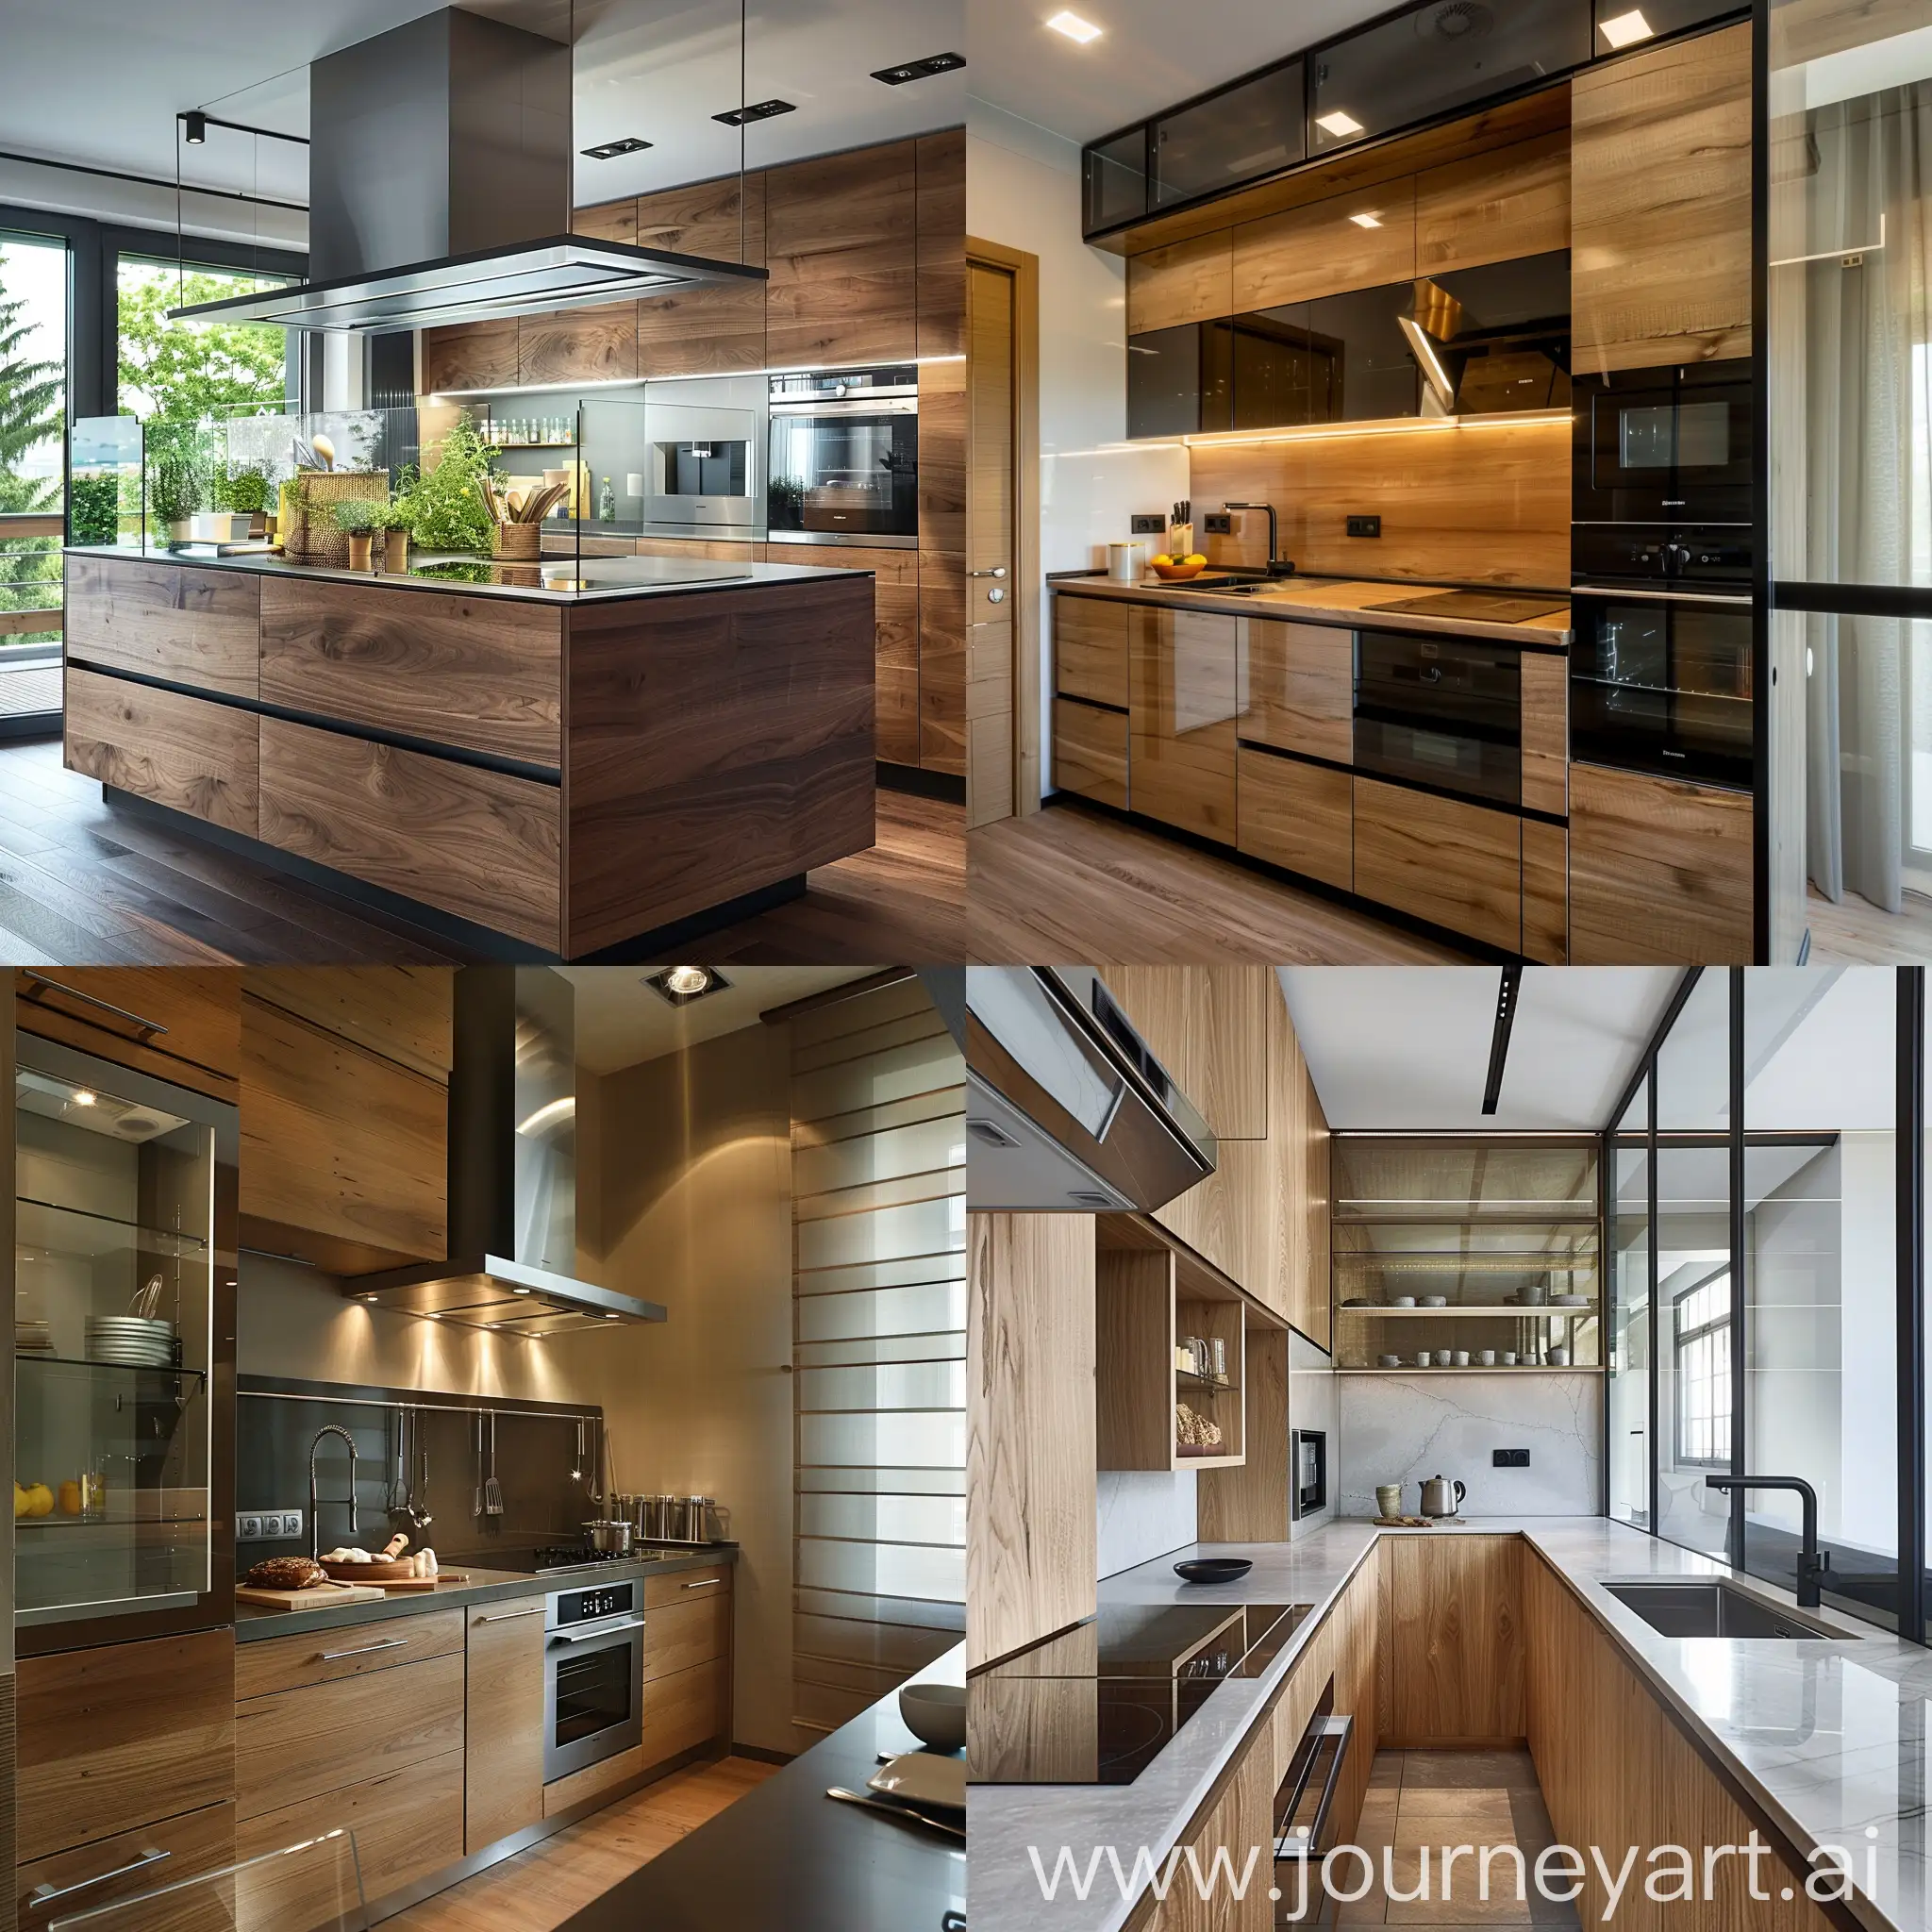 Contemporary-Kitchen-Interior-with-Wood-and-Glass-Elements